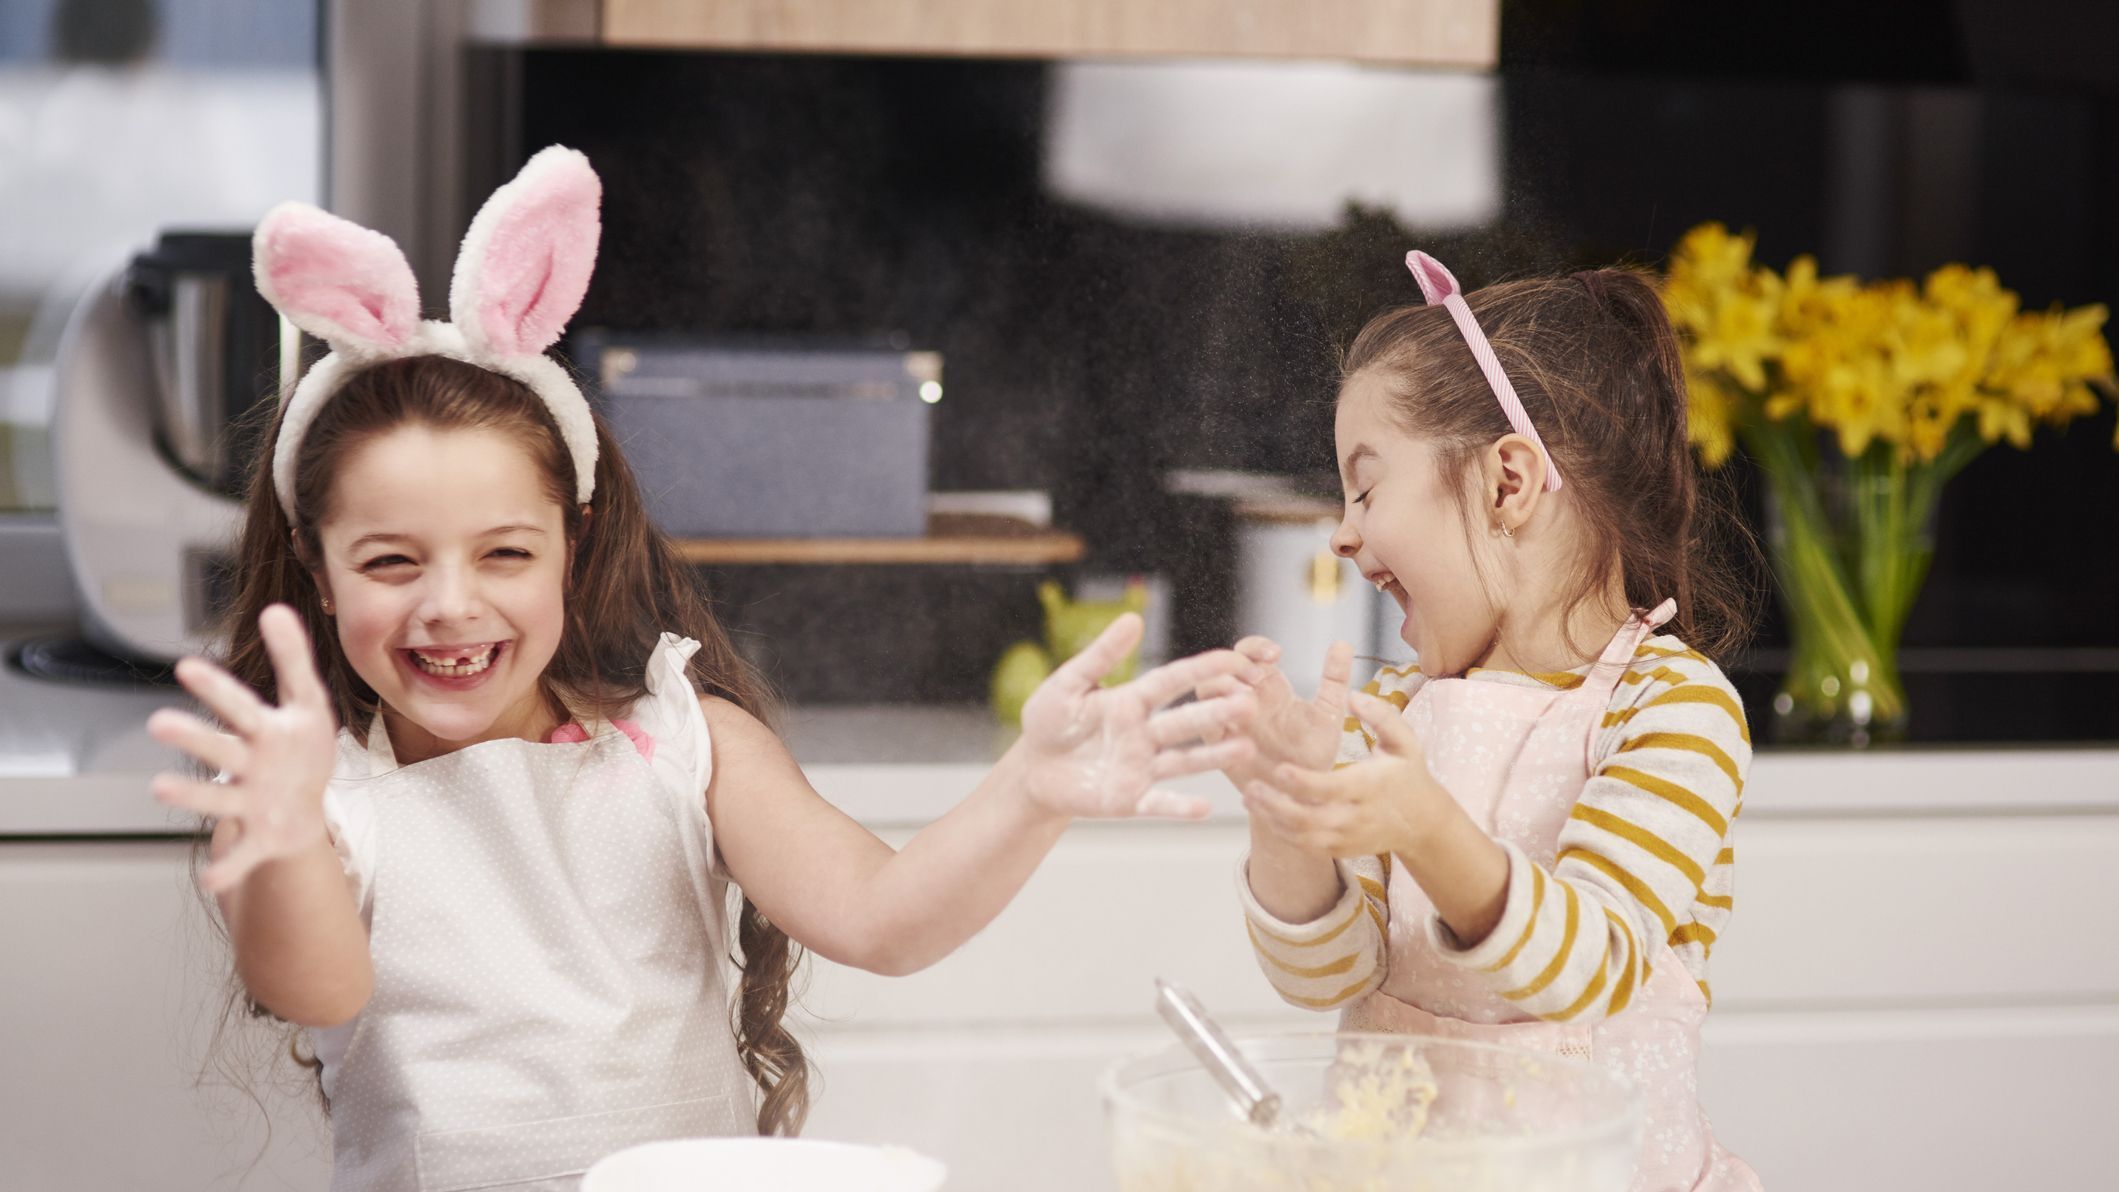 happy easter sayings for kids